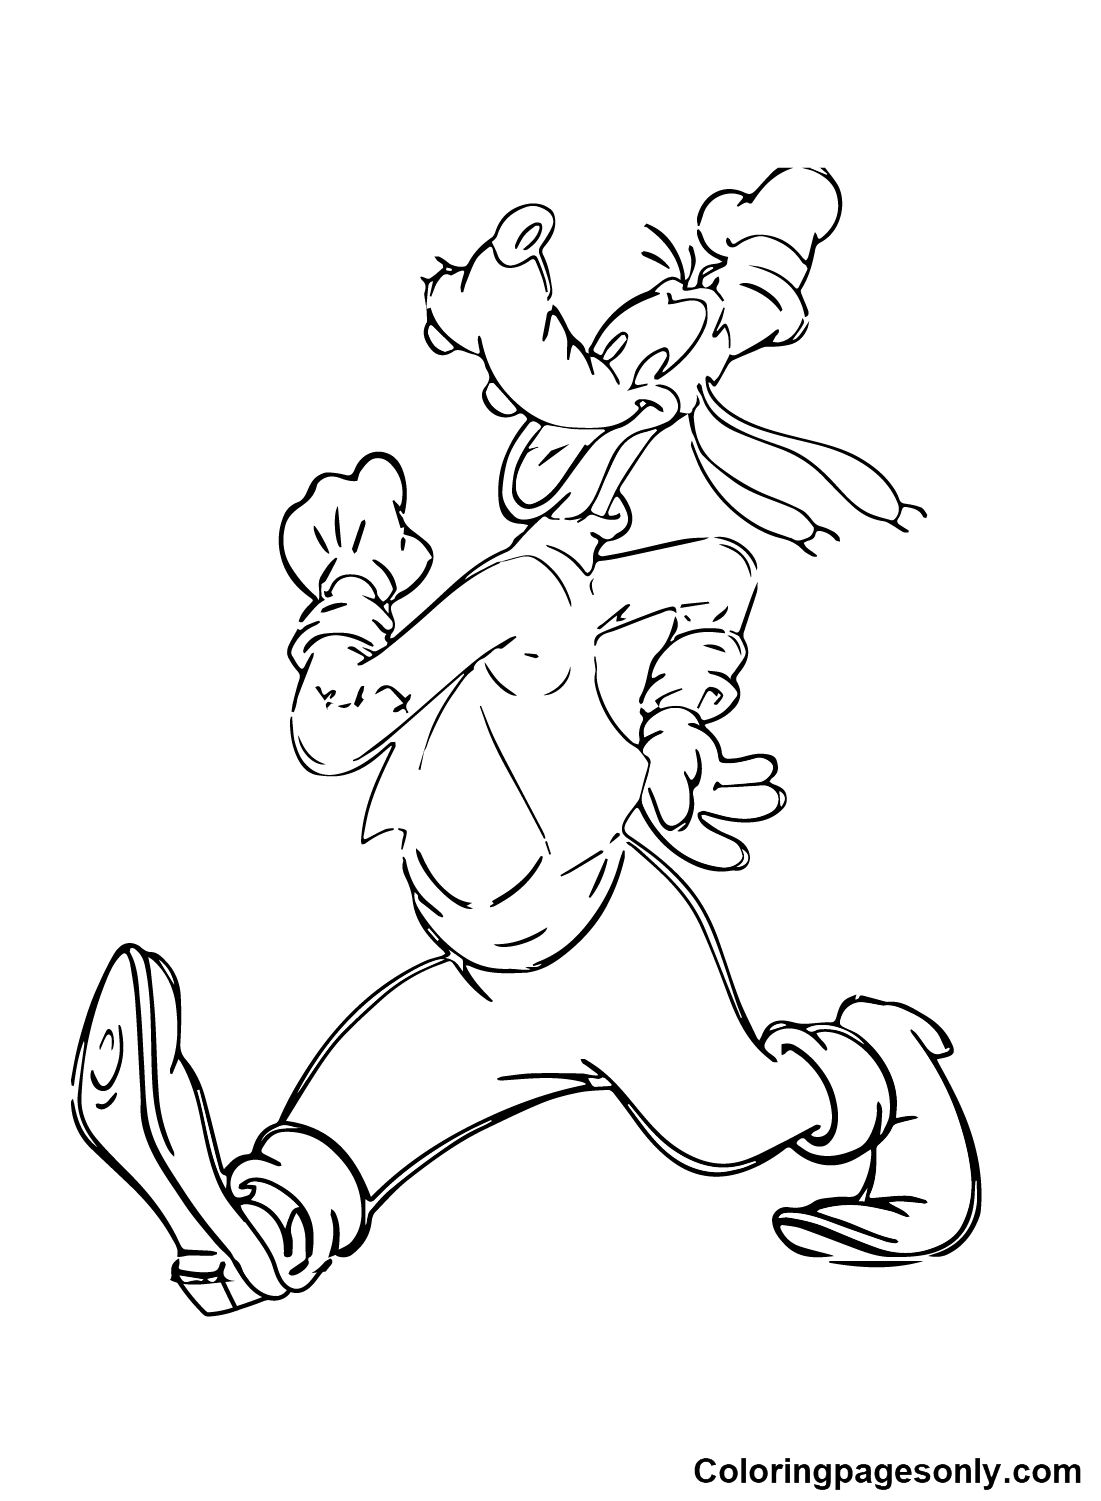 Goofy from Kingdom Hearts Coloring Pages